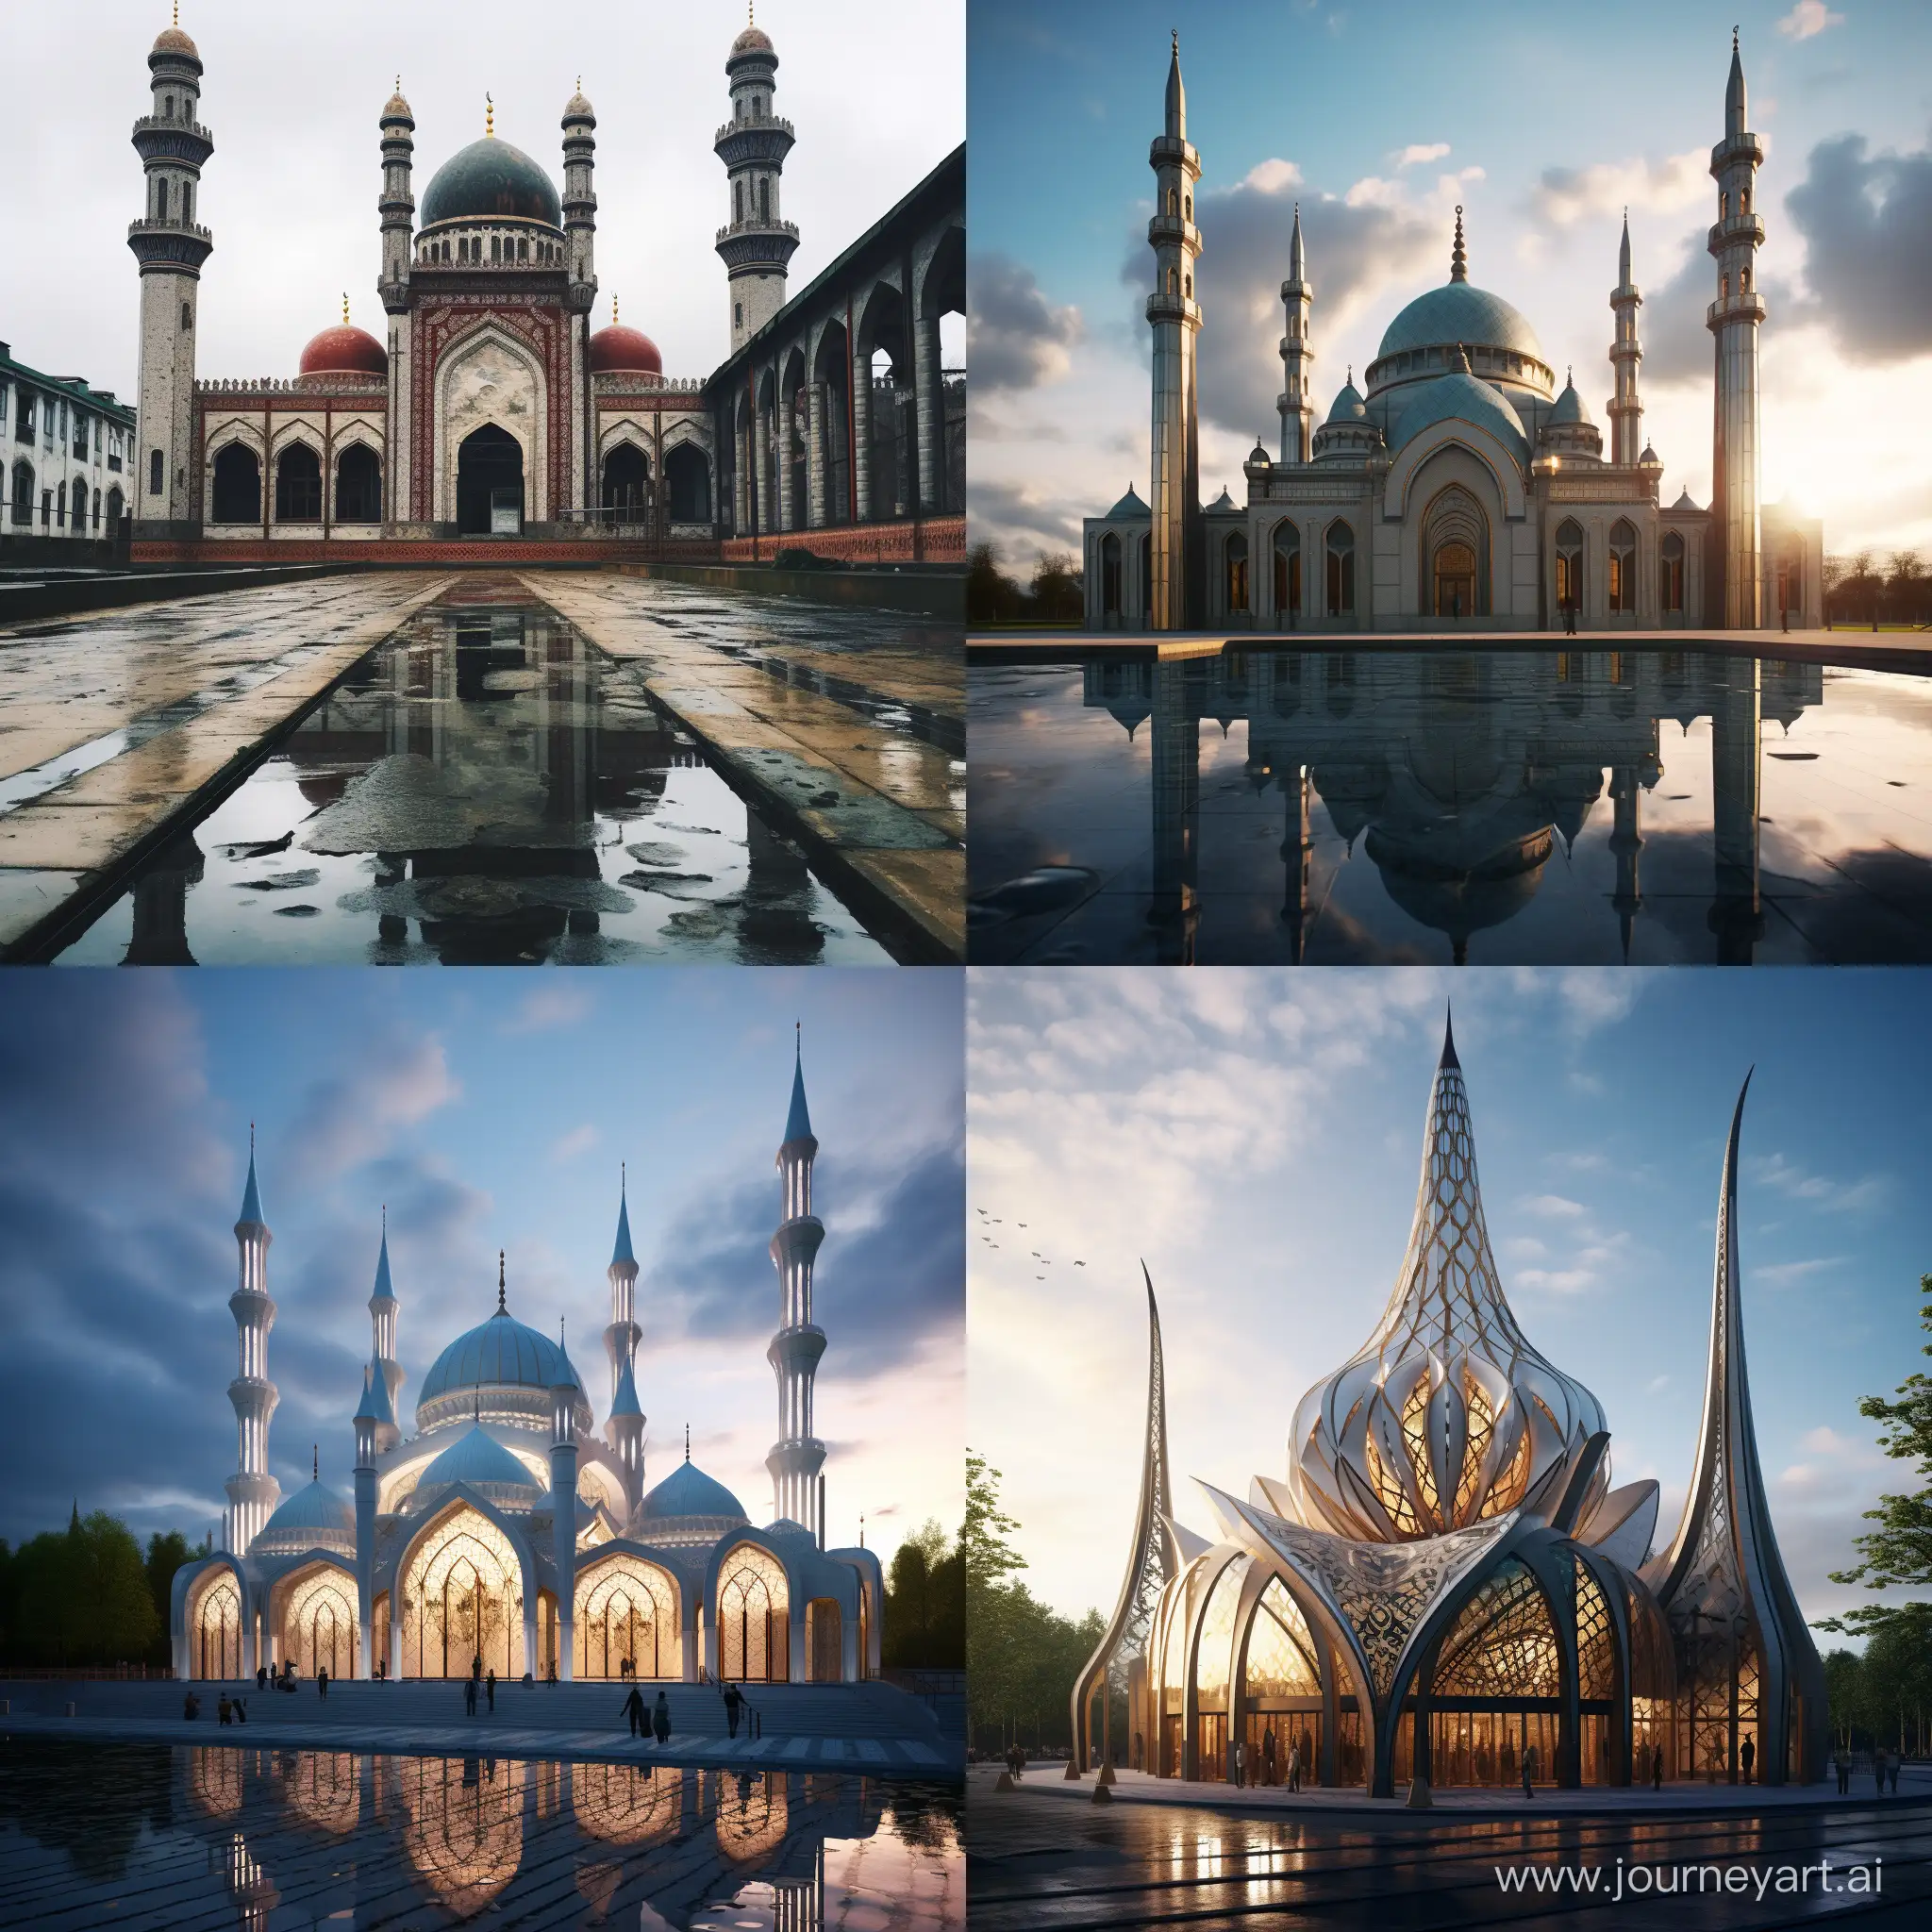 Kaliningrad-Architectural-Mosque-with-11-Aspect-Ratio